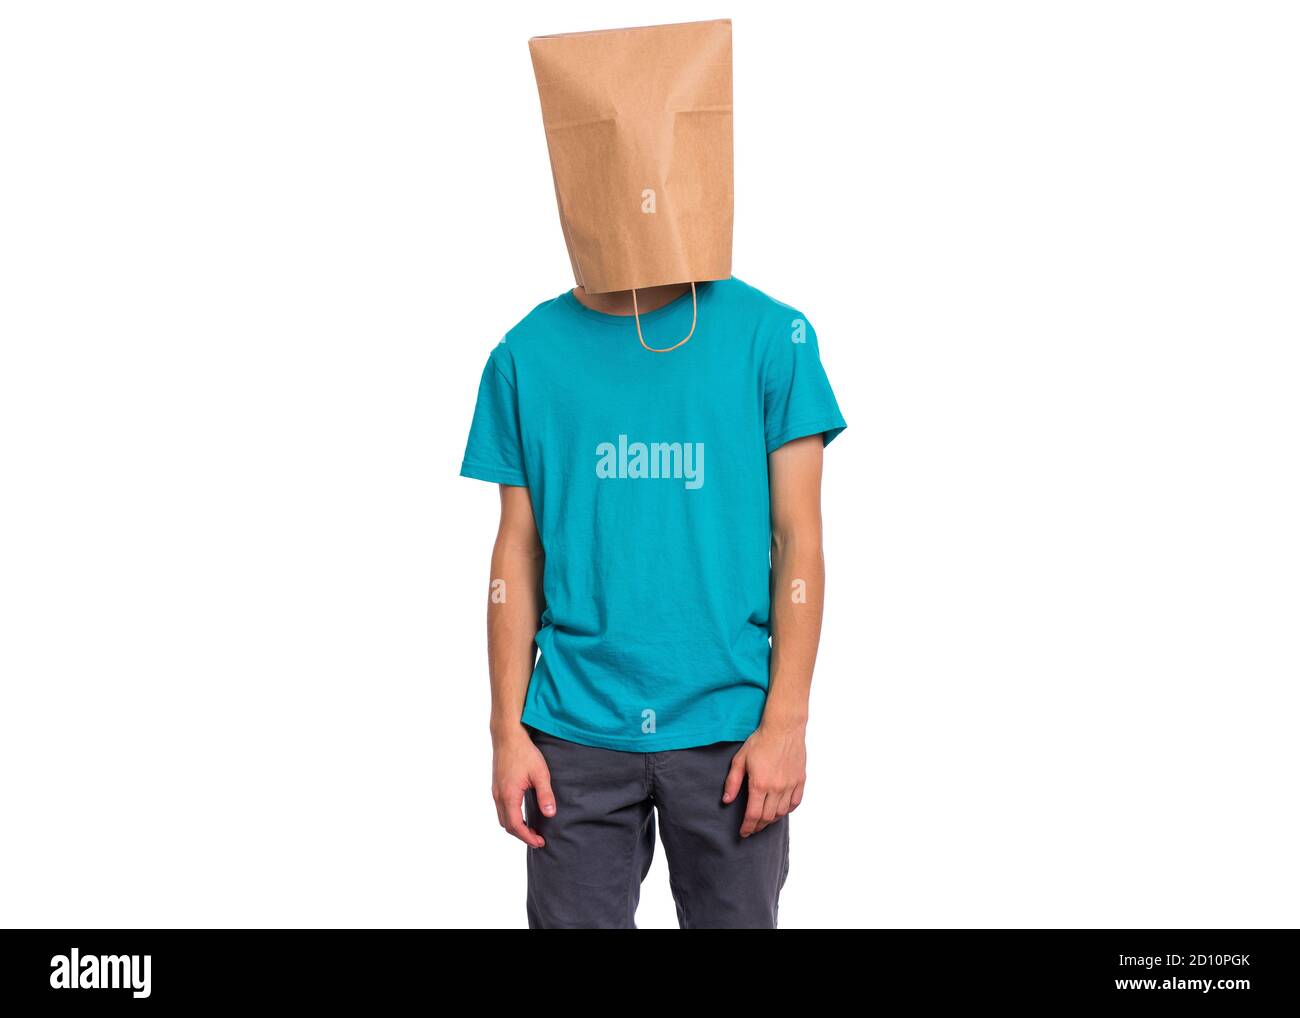 Boy with paper bag over head Stock Photo